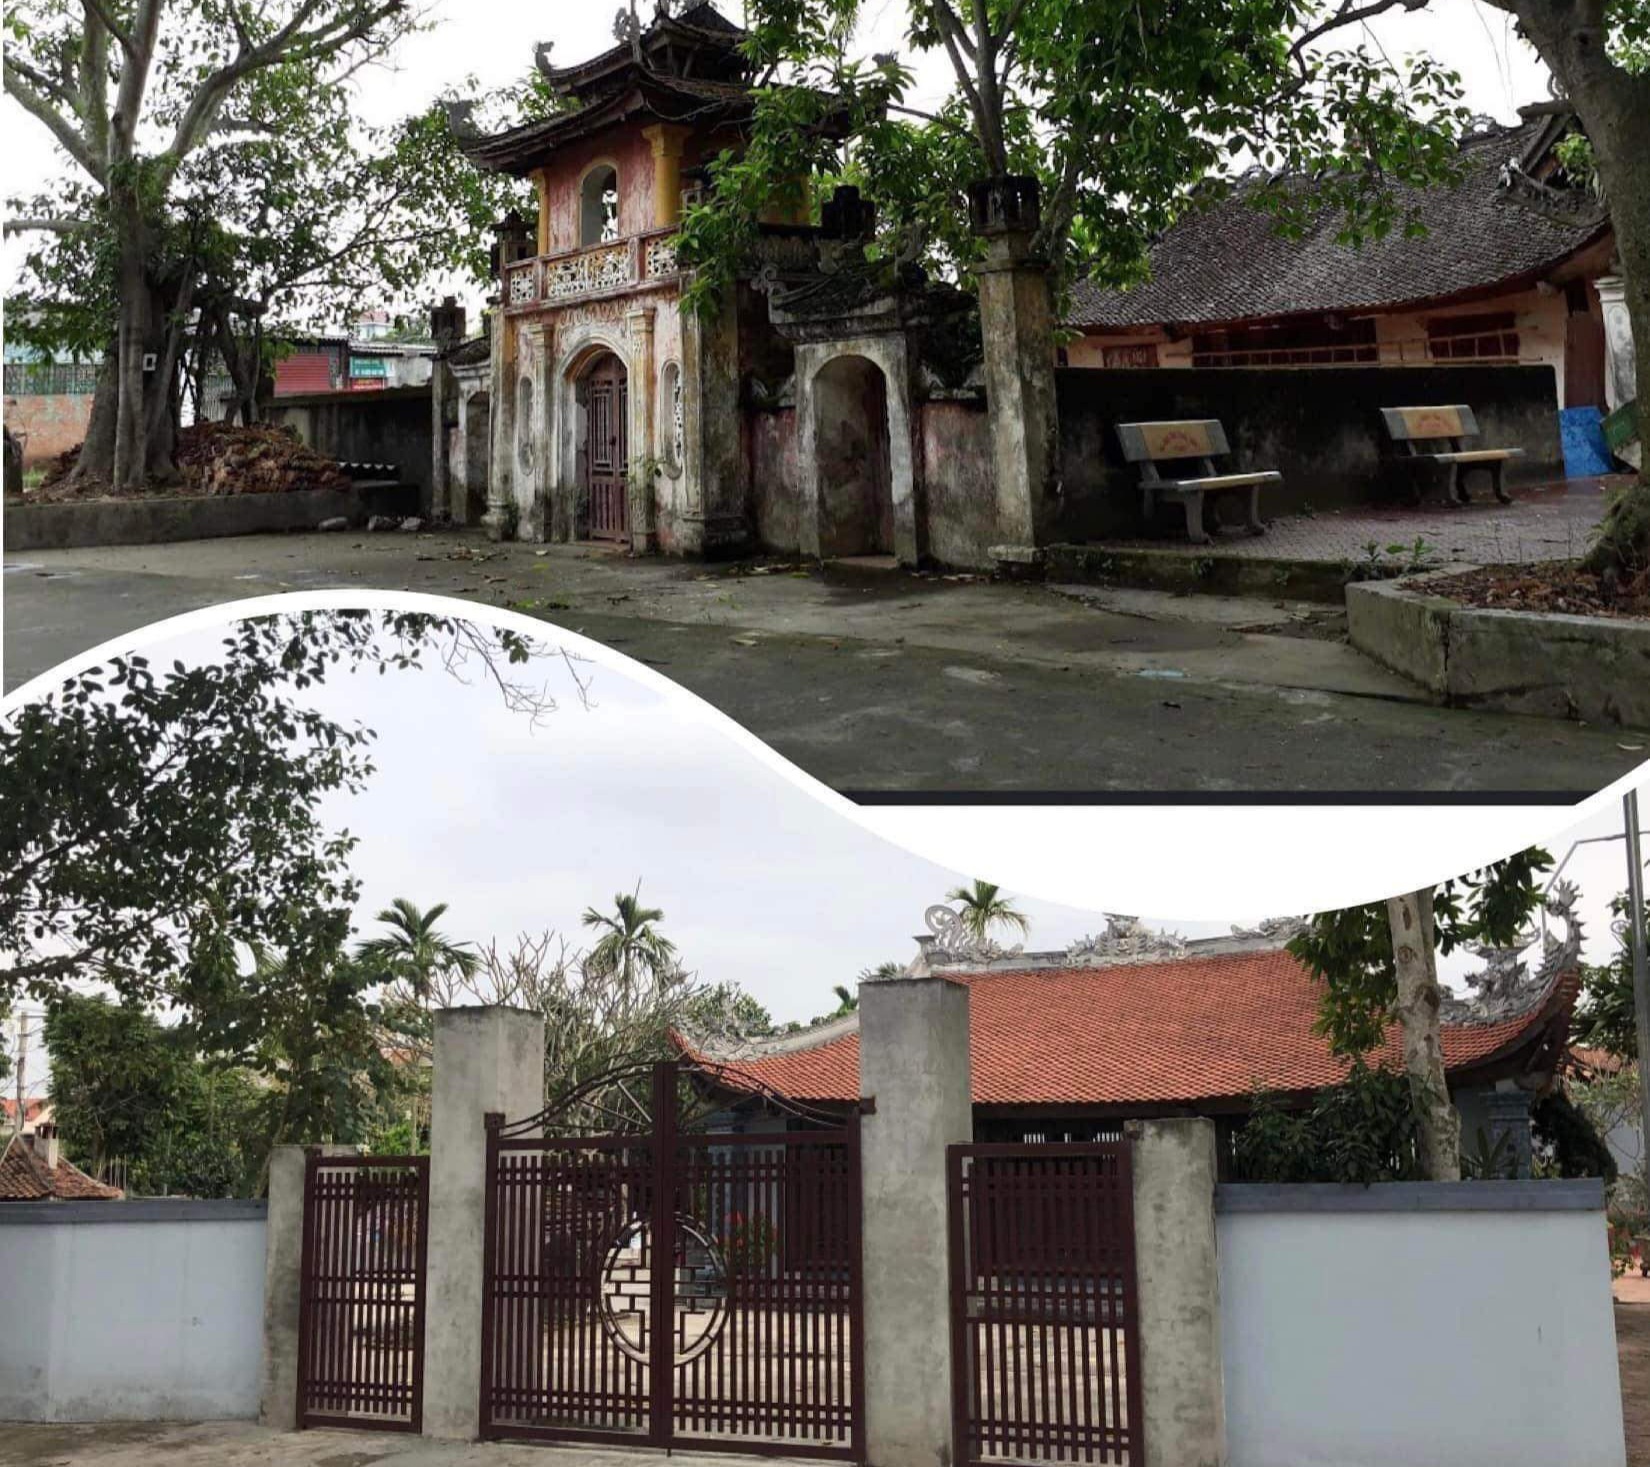 The gate of the national-level relic temple in Hai Duong was demolished and replaced with an iron gate